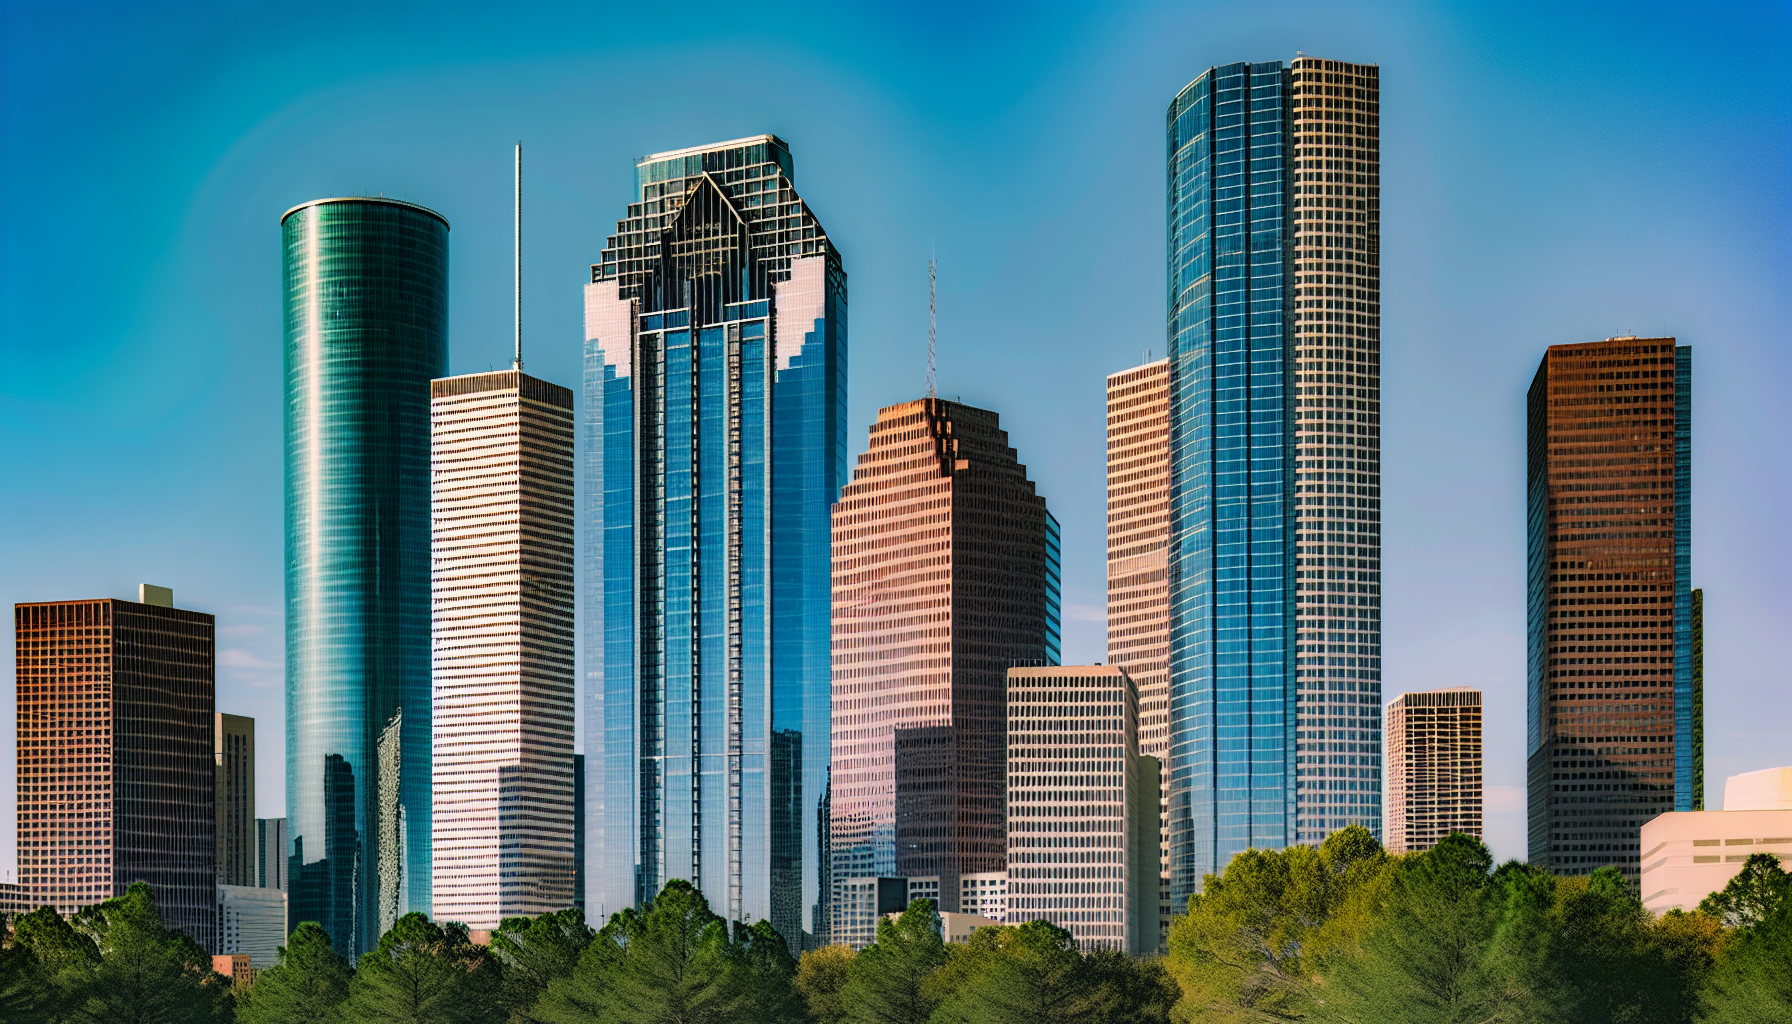 Houston skyline with modern buildings and skyscrapers